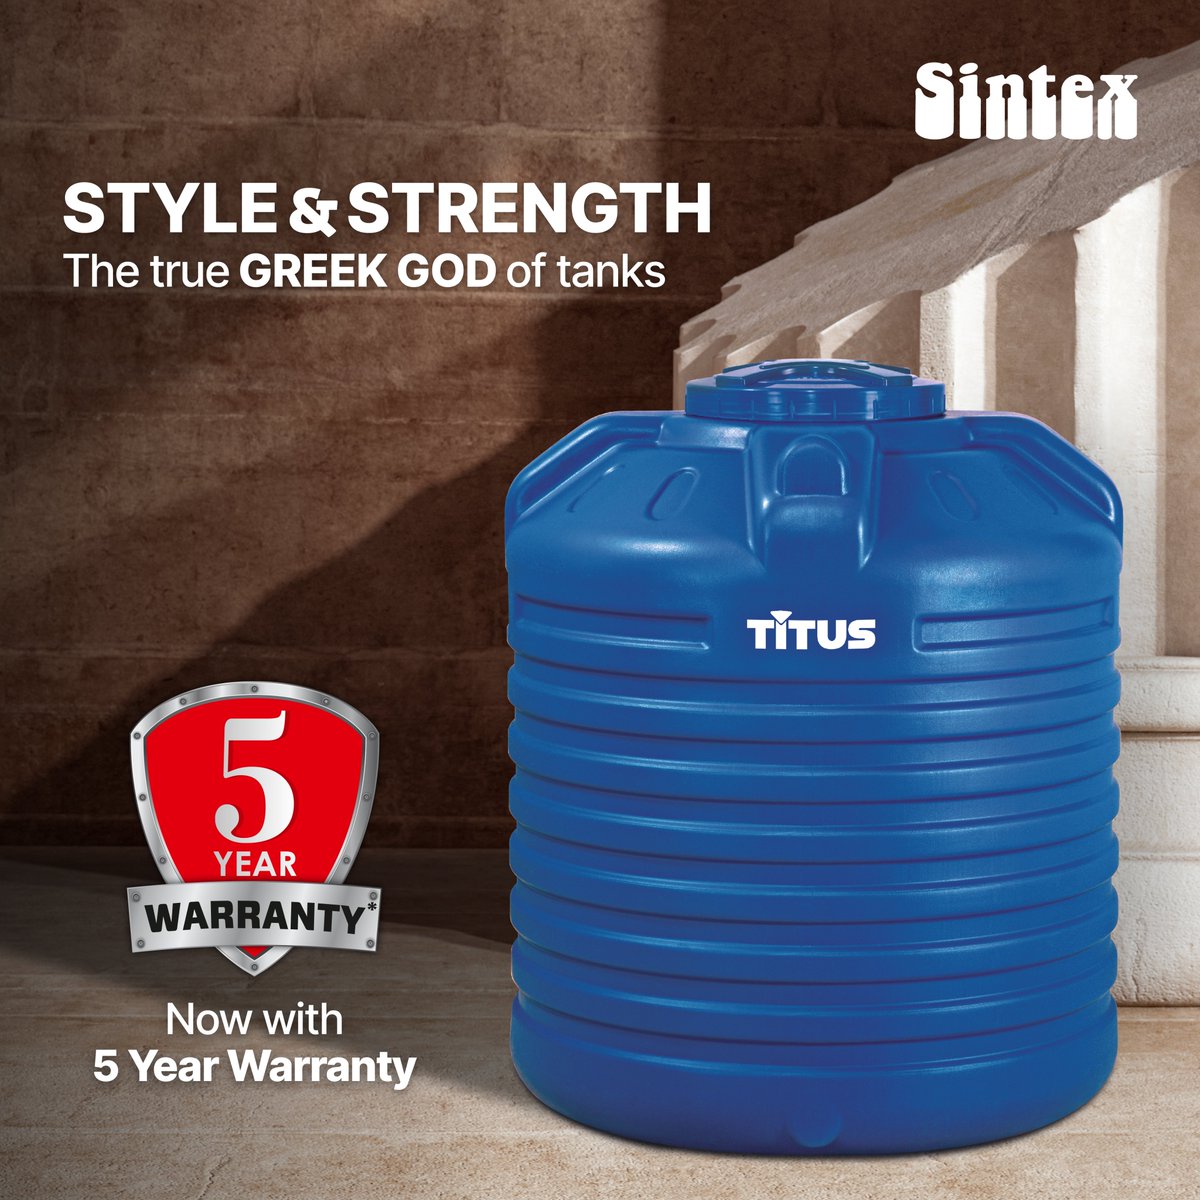 Sintex Titus, the Greek God of Tanks, stands tall as the epitome of strength and style. With its sturdy frame, this tank conquers any terrain and weather conditions.

Get in touch with us today.

#sintex #sintexplastics #sintextitus #sintexbapl #sintexwatertanks